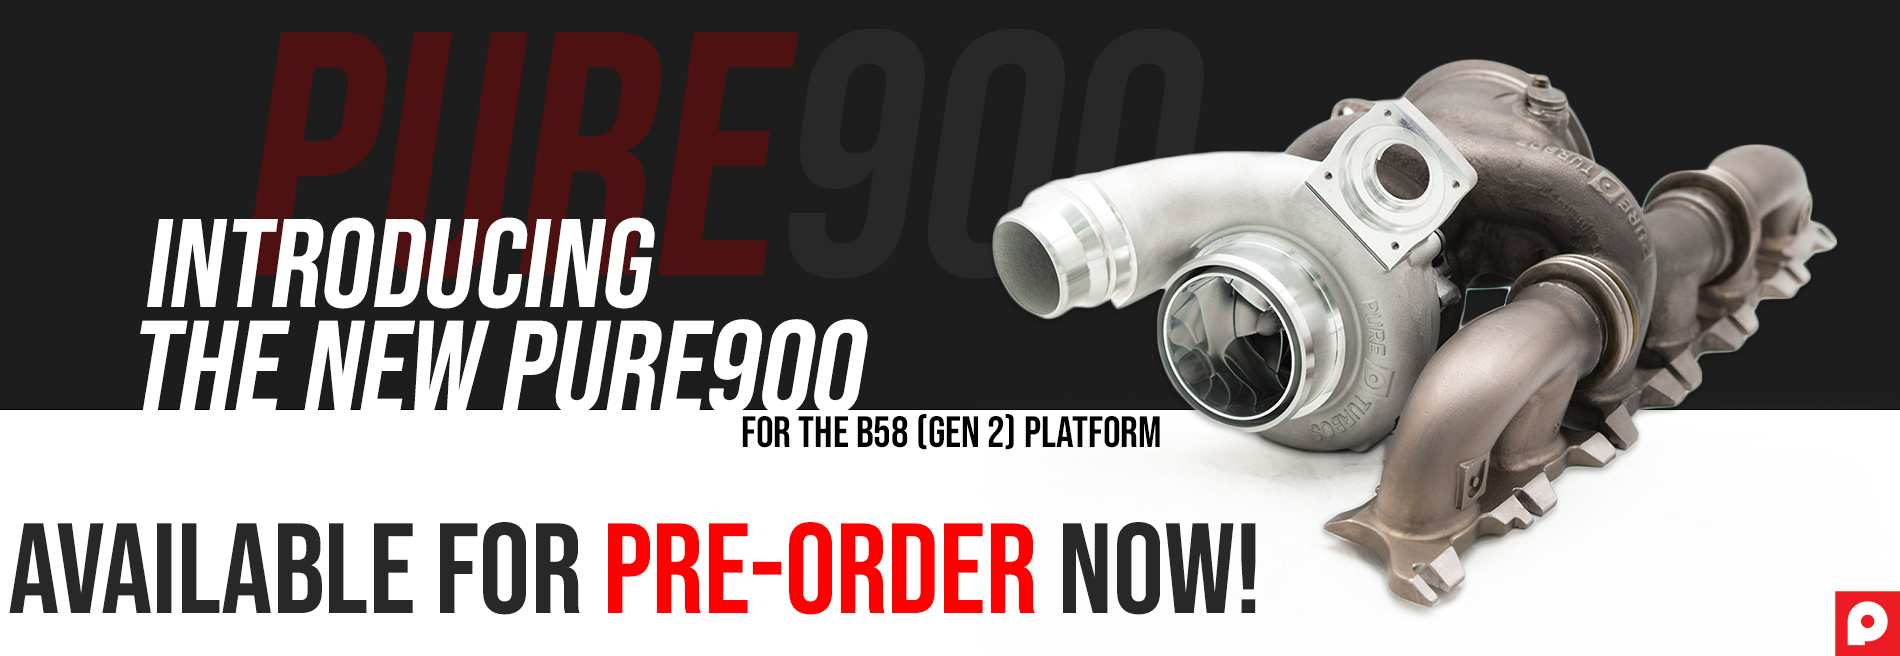 PureTurbos Pre Order Pure900 B58 Gen 2 Available Now Website Cover